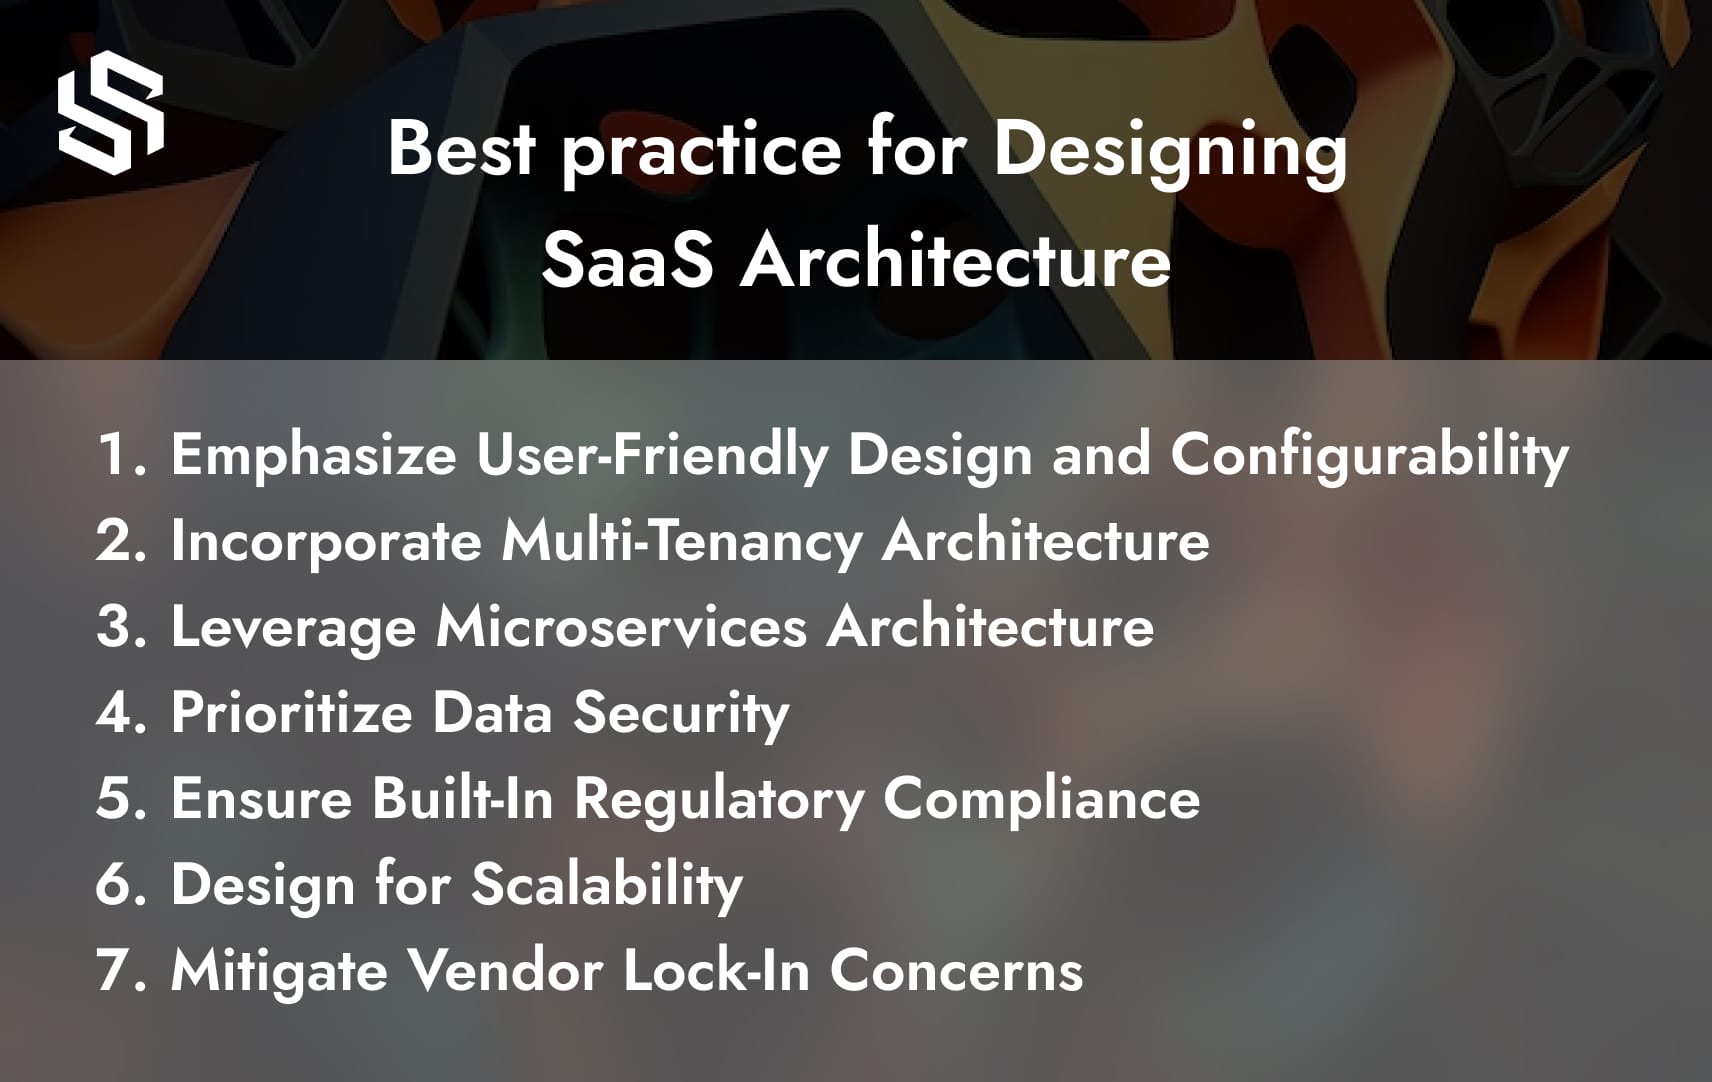 Best Practice for Designing SaaS Architecture